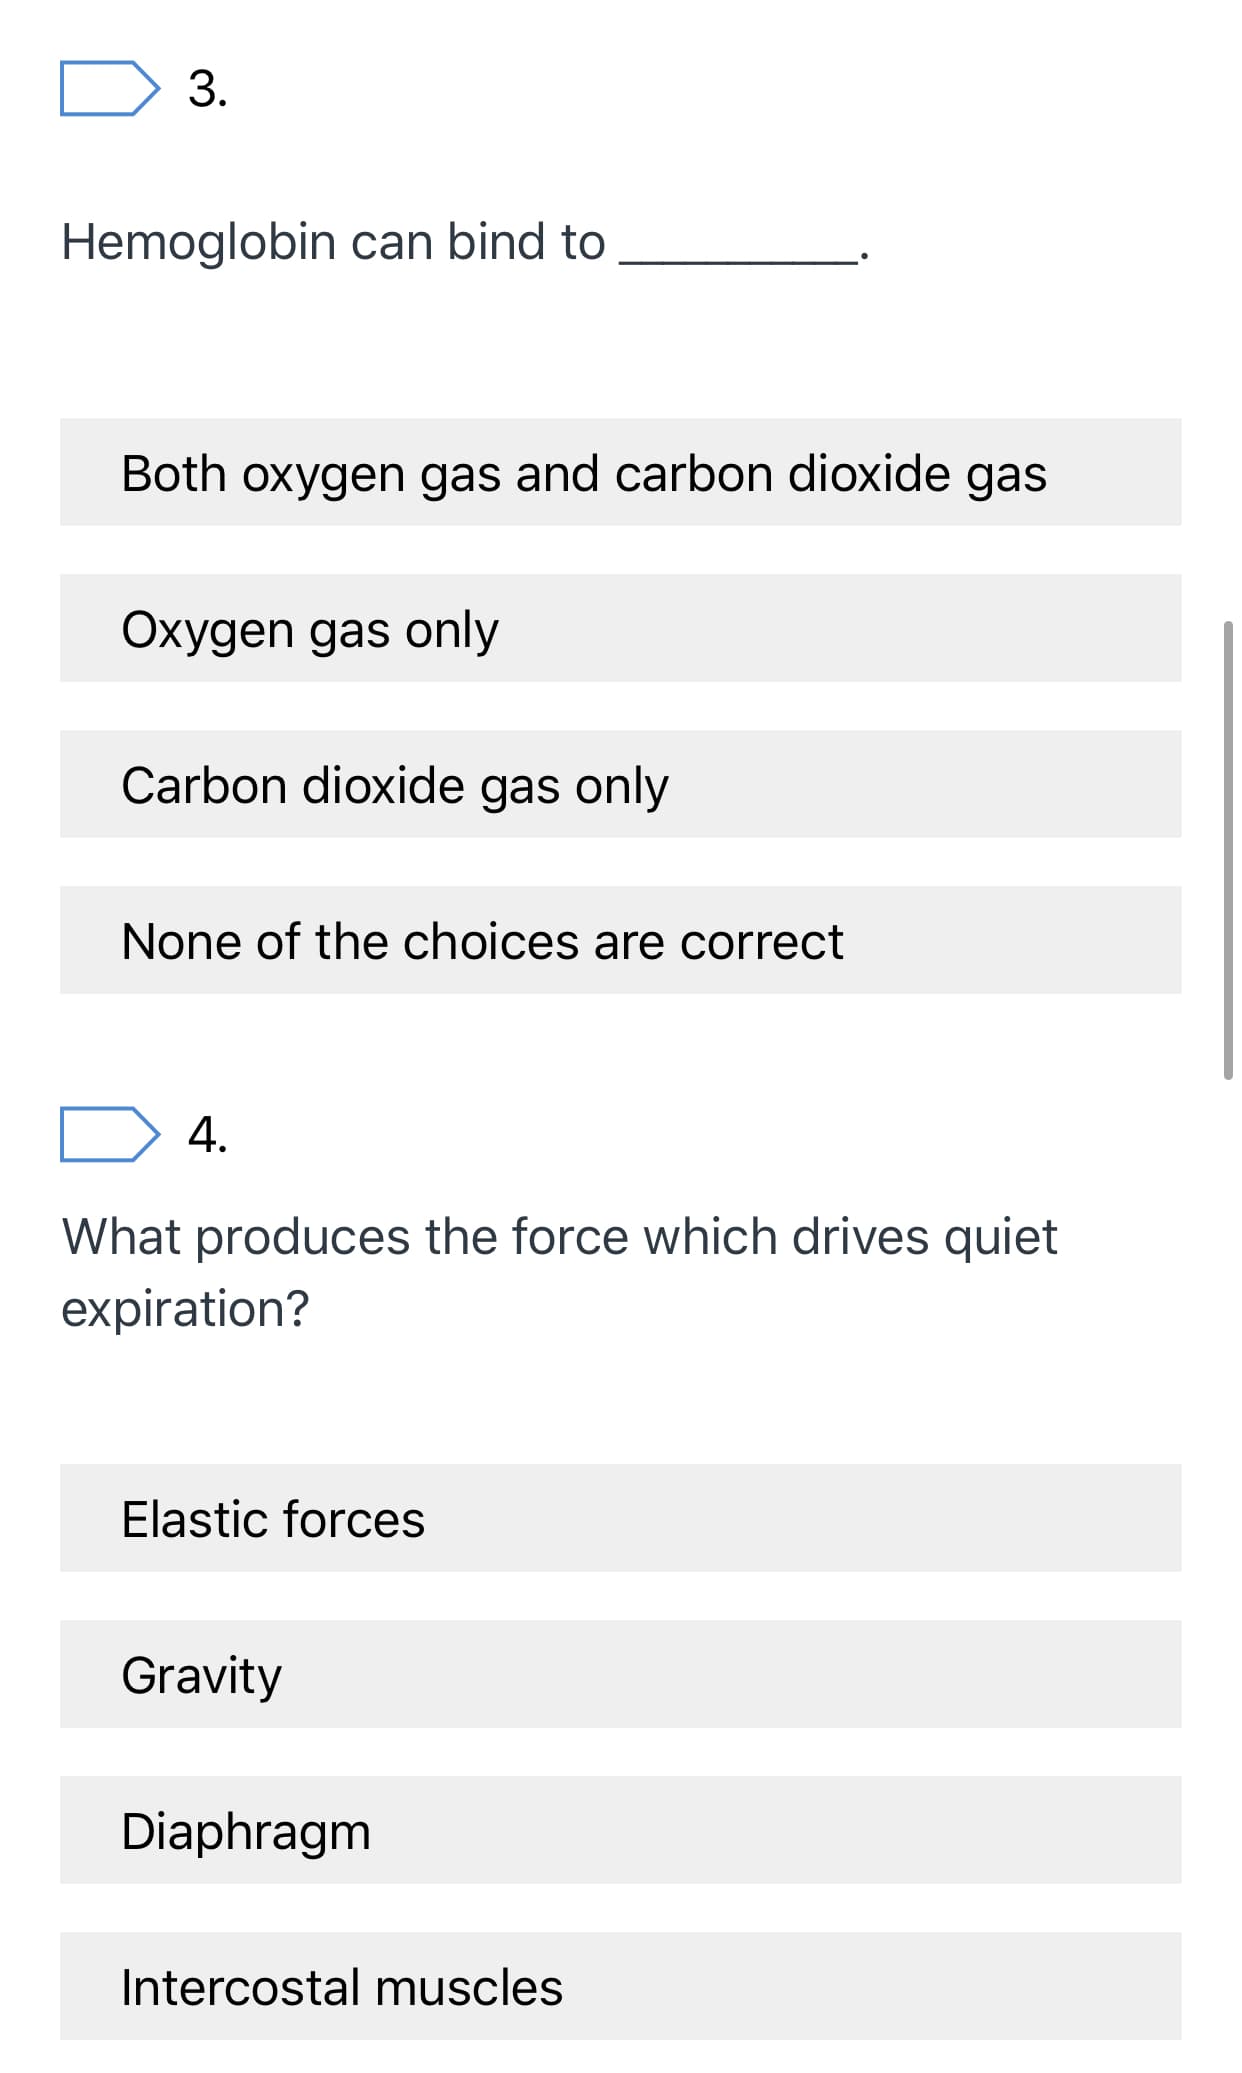 3.
Hemoglobin can bind to
Both oxygen gas and carbon dioxide gas
Oxygen gas only
Carbon dioxide gas only
None of the choices are correct
4.
What produces the force which drives quiet
expiration?
Elastic forces
Gravity
Diaphragm
Intercostal muscles
